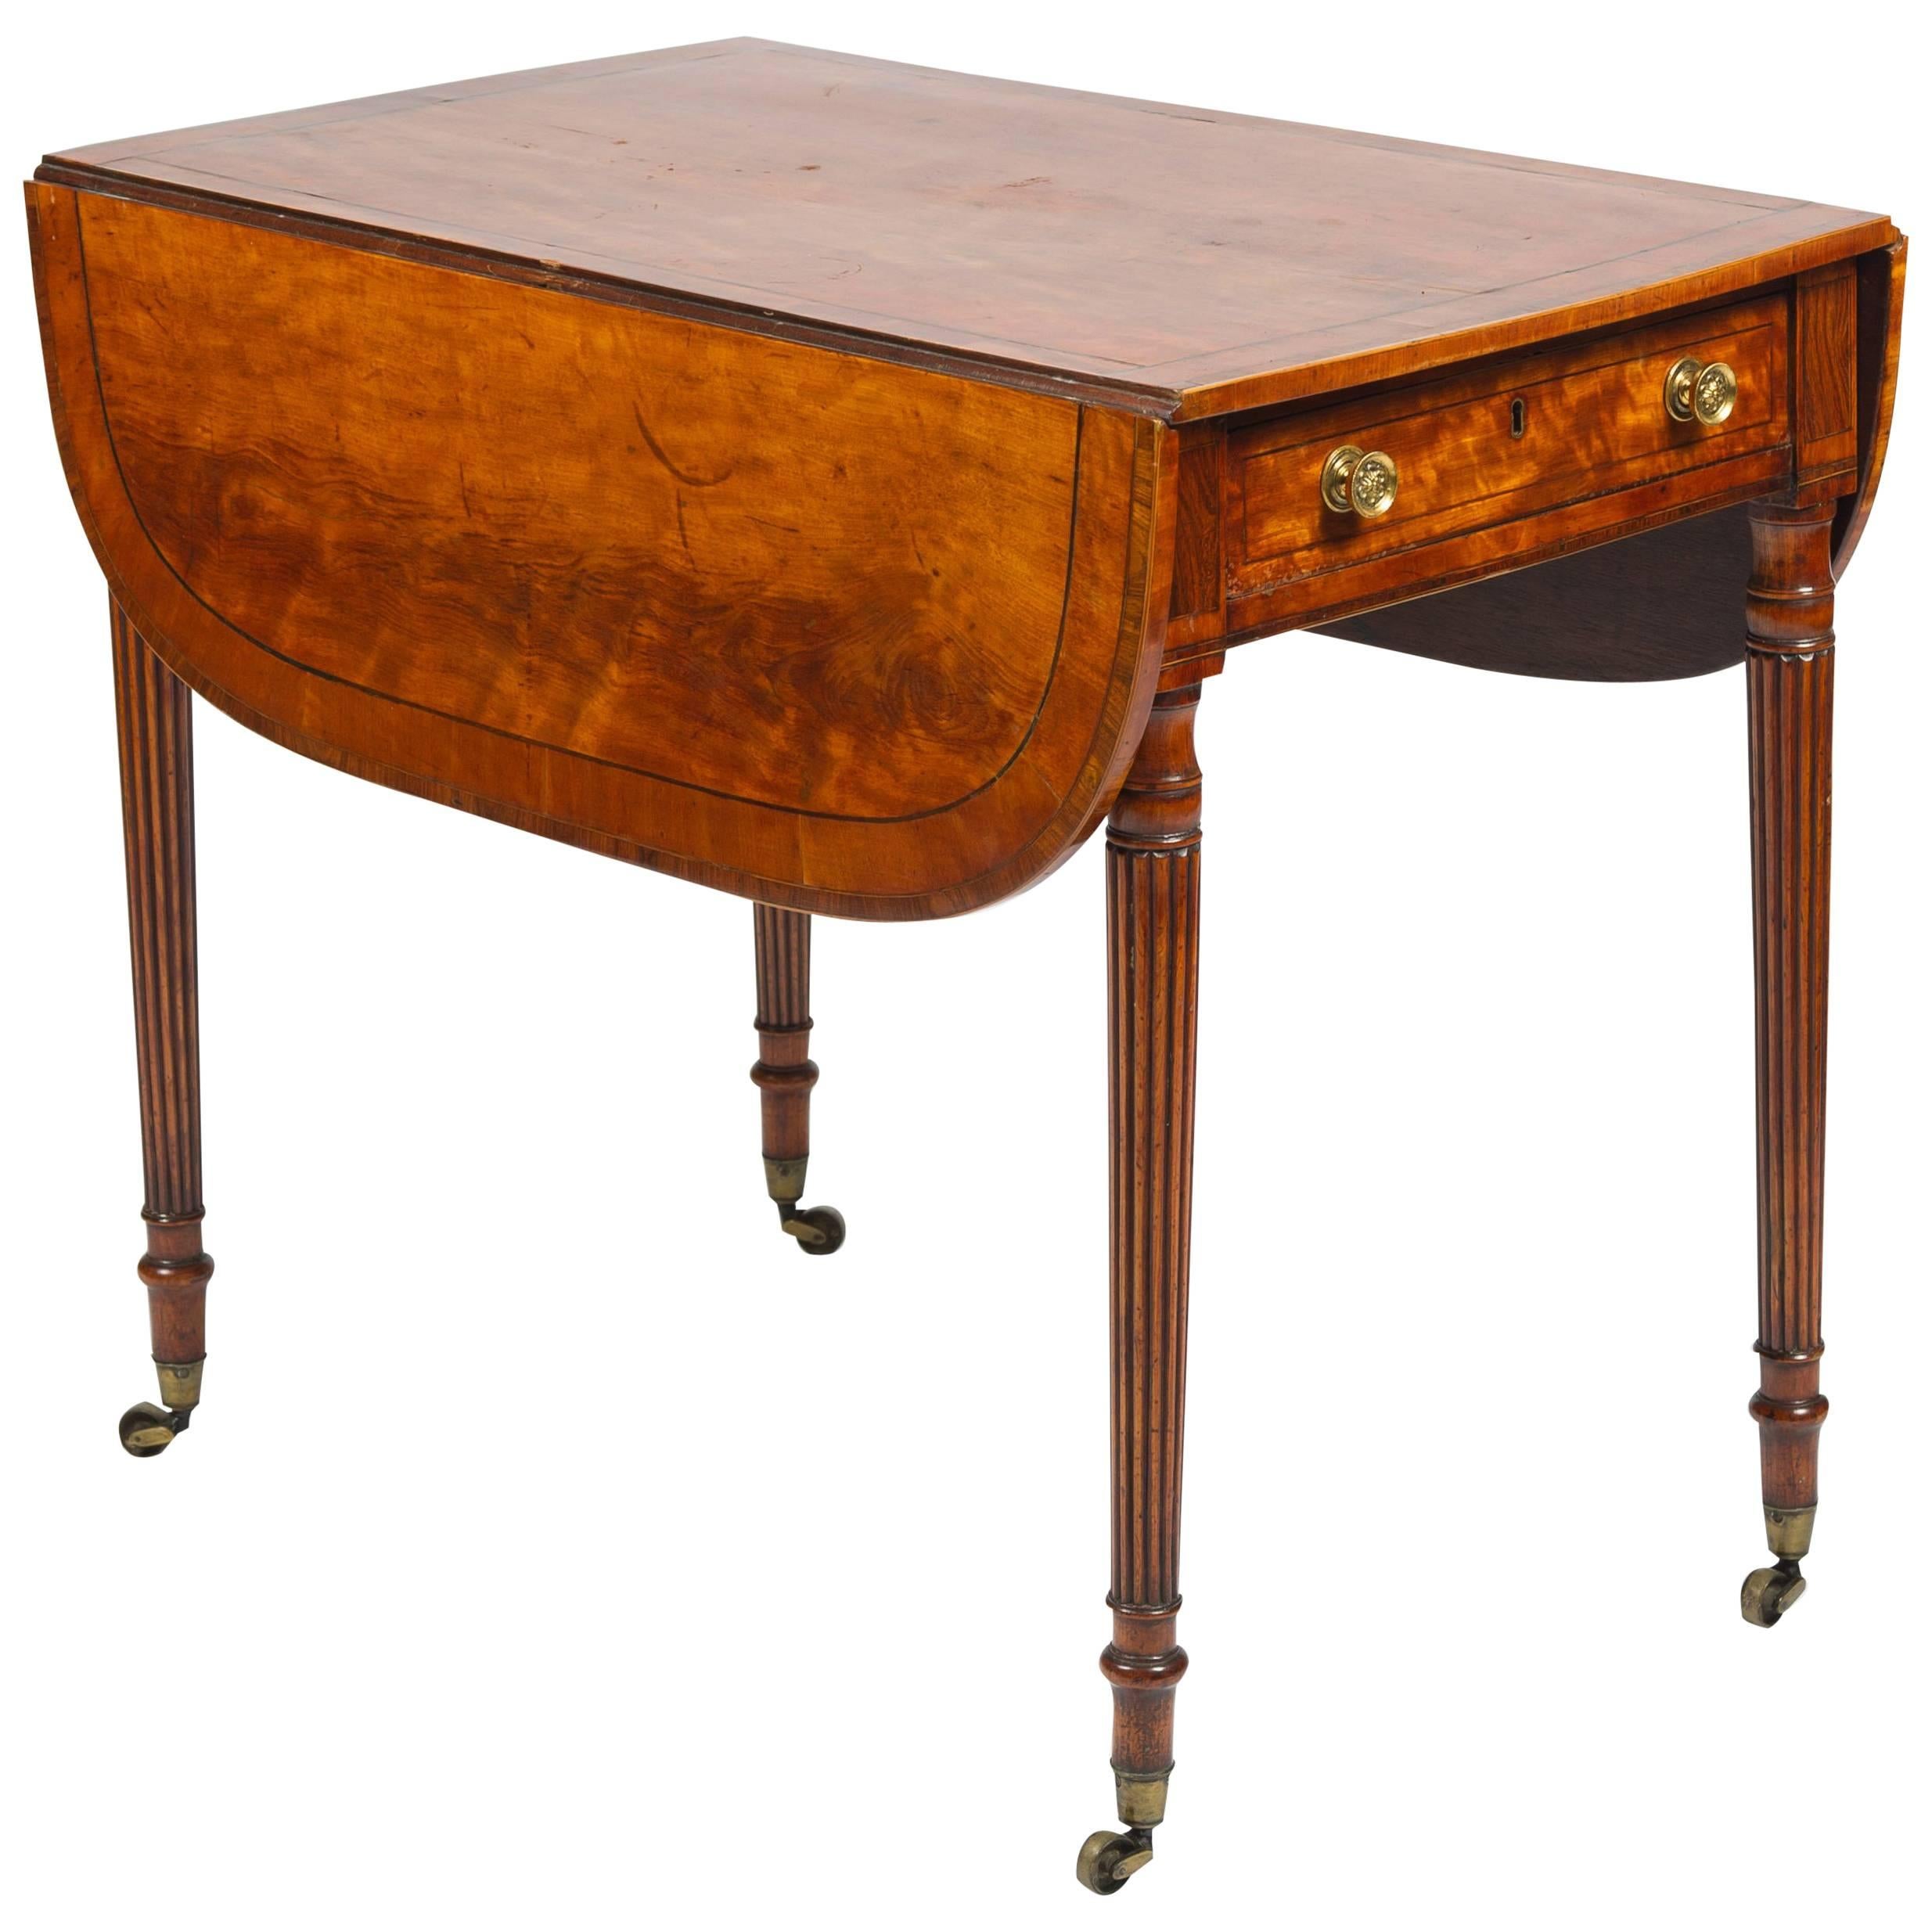 Gillows Influenced Satinwood Pembroke Table